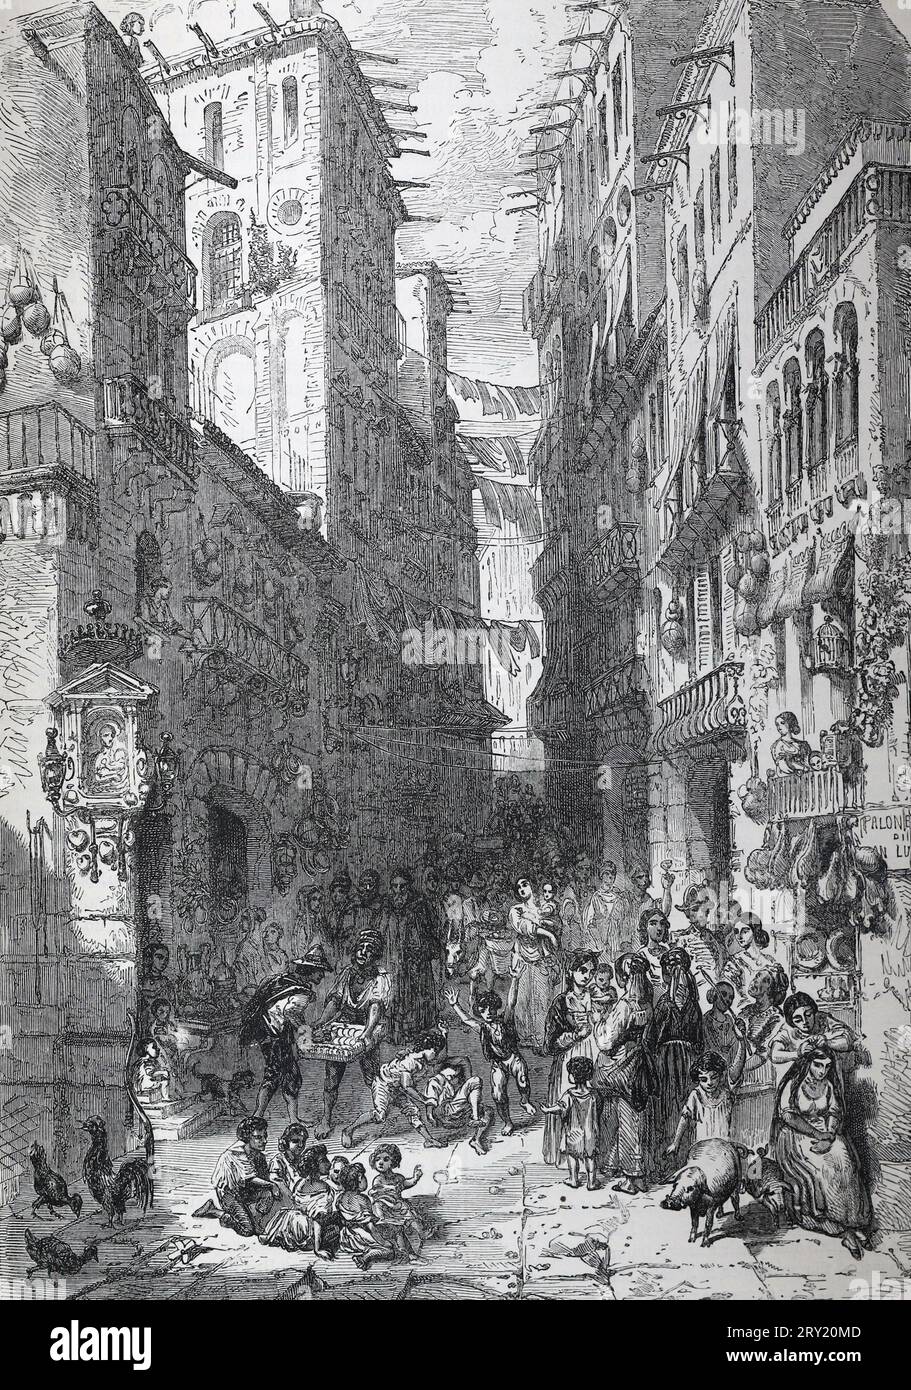 A street in Naples. Italy in the 19th century; Black and White Illustration Stock Photo